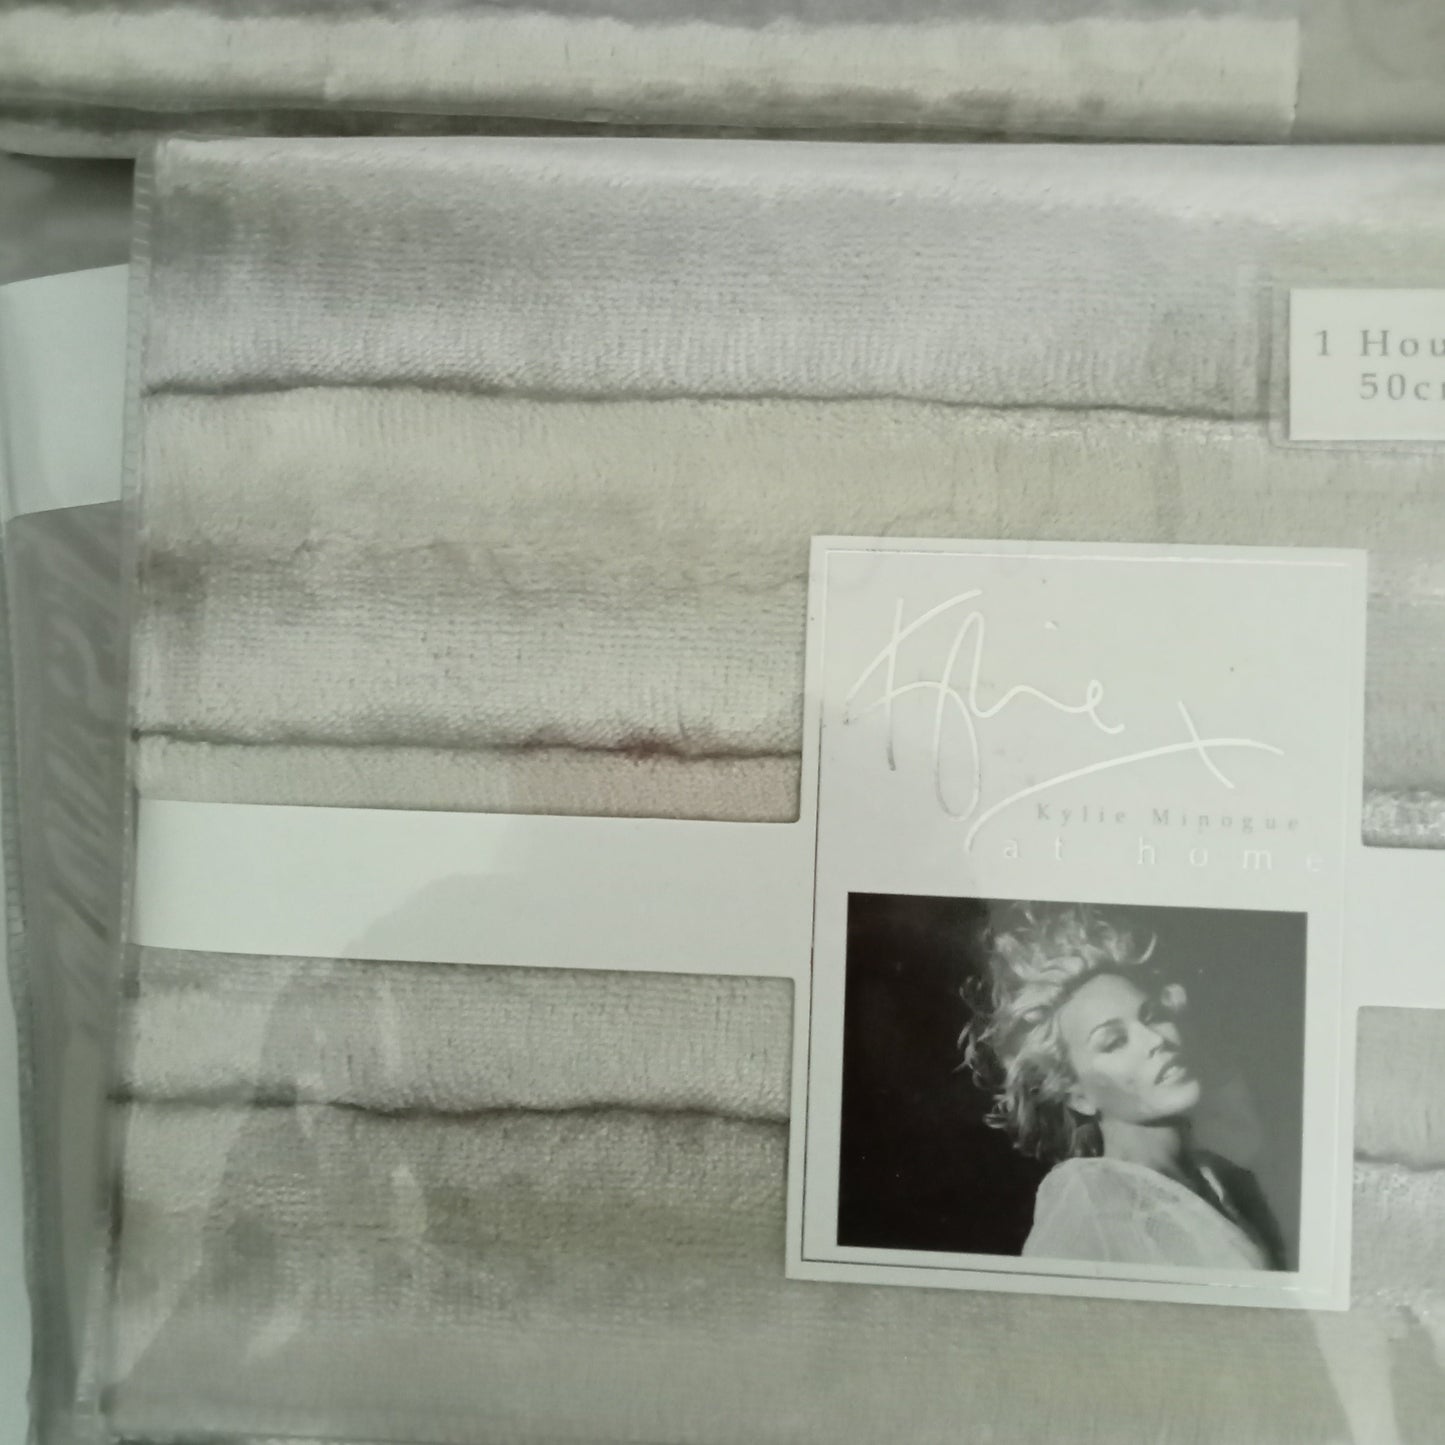 Lucette Duvet Cover and Housewife Pillowcase/s by Kylie Minogue at home